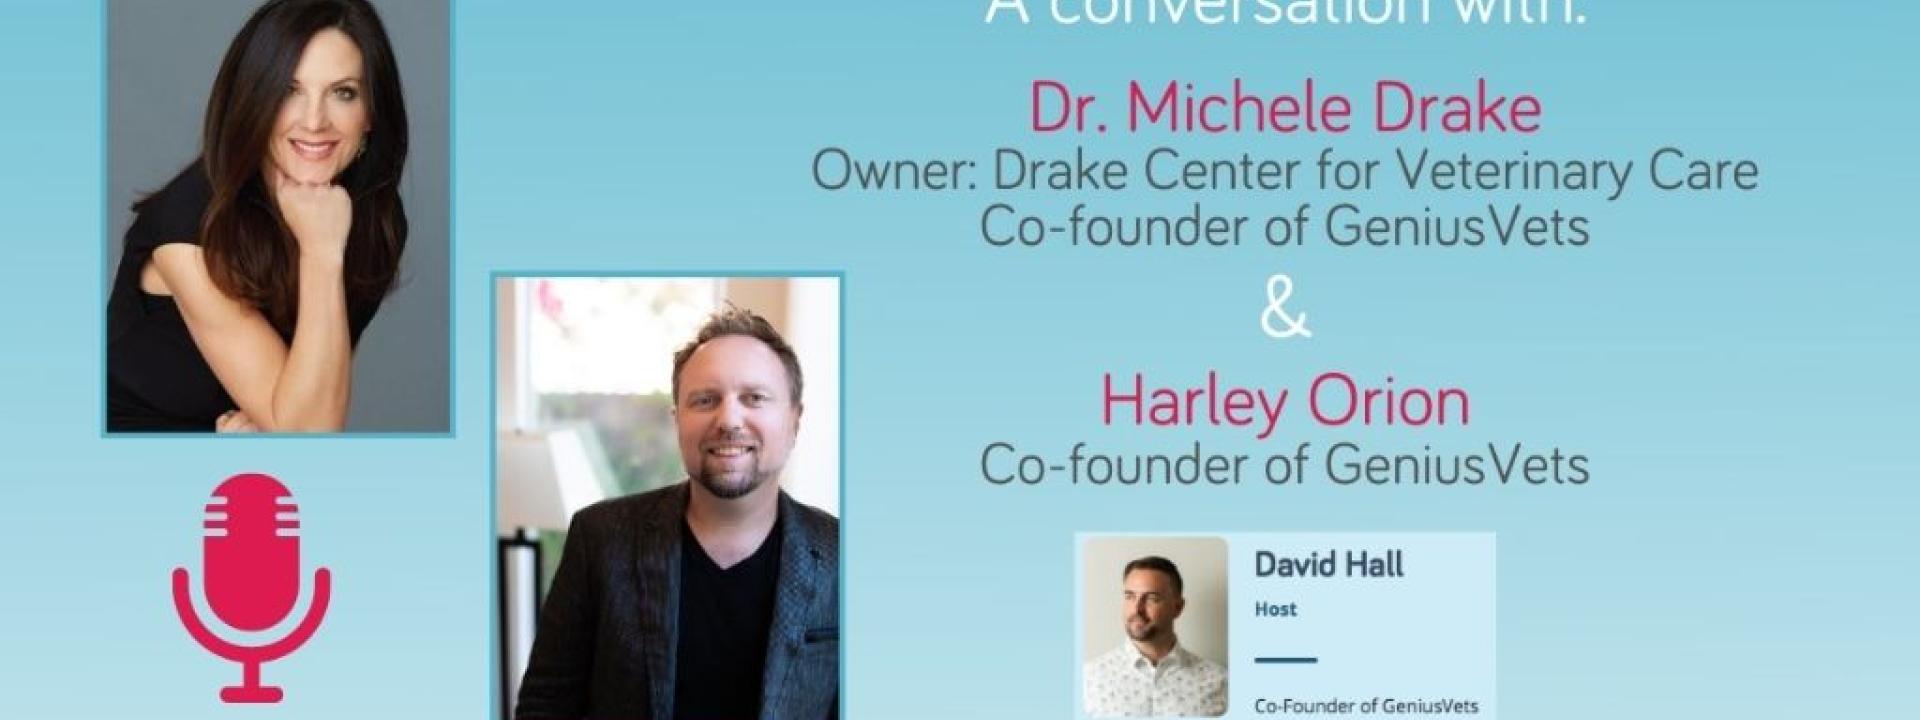 Dr. Michele Drake and Harley Orion on Defeating the Phone Frenzy